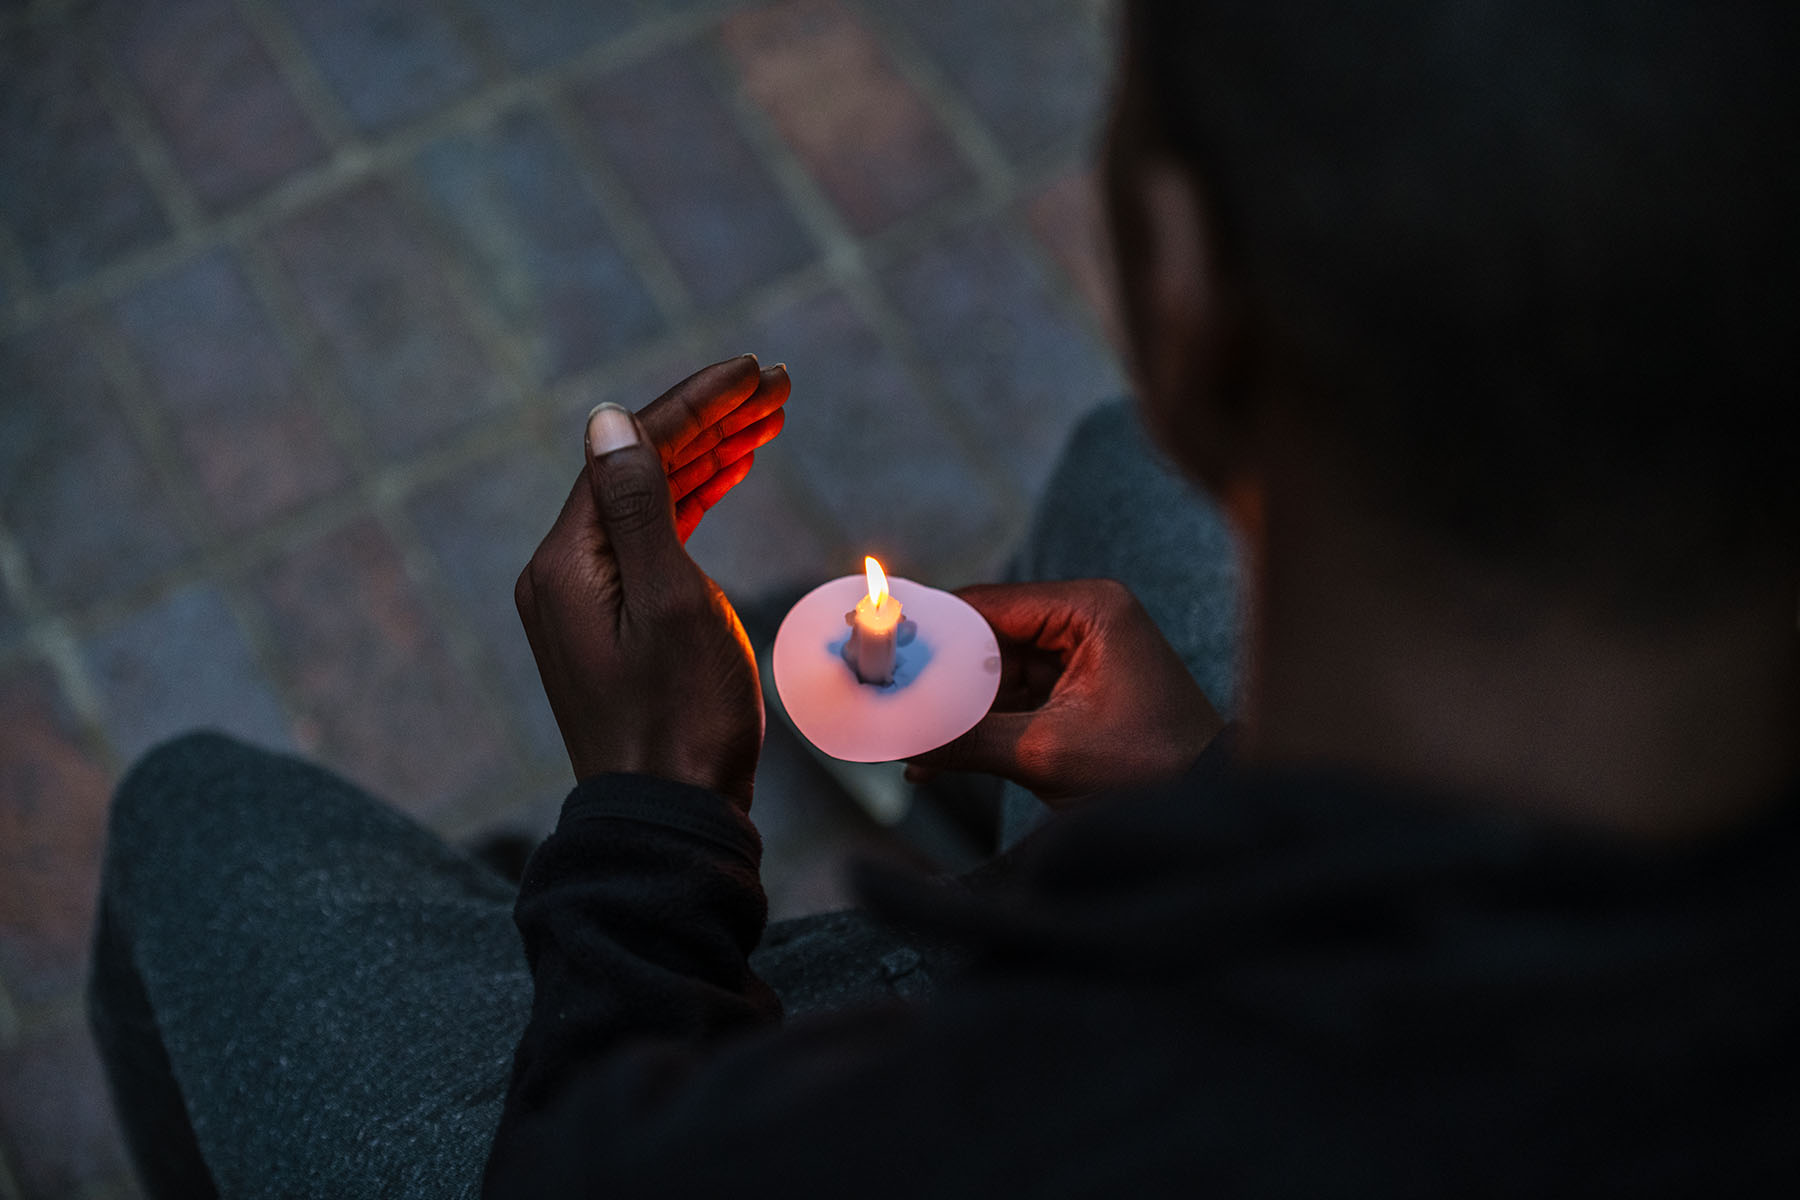 Demonstrators hold a candlelight vigil at the Breonna Taylor memorial at Jefferson Square Park.